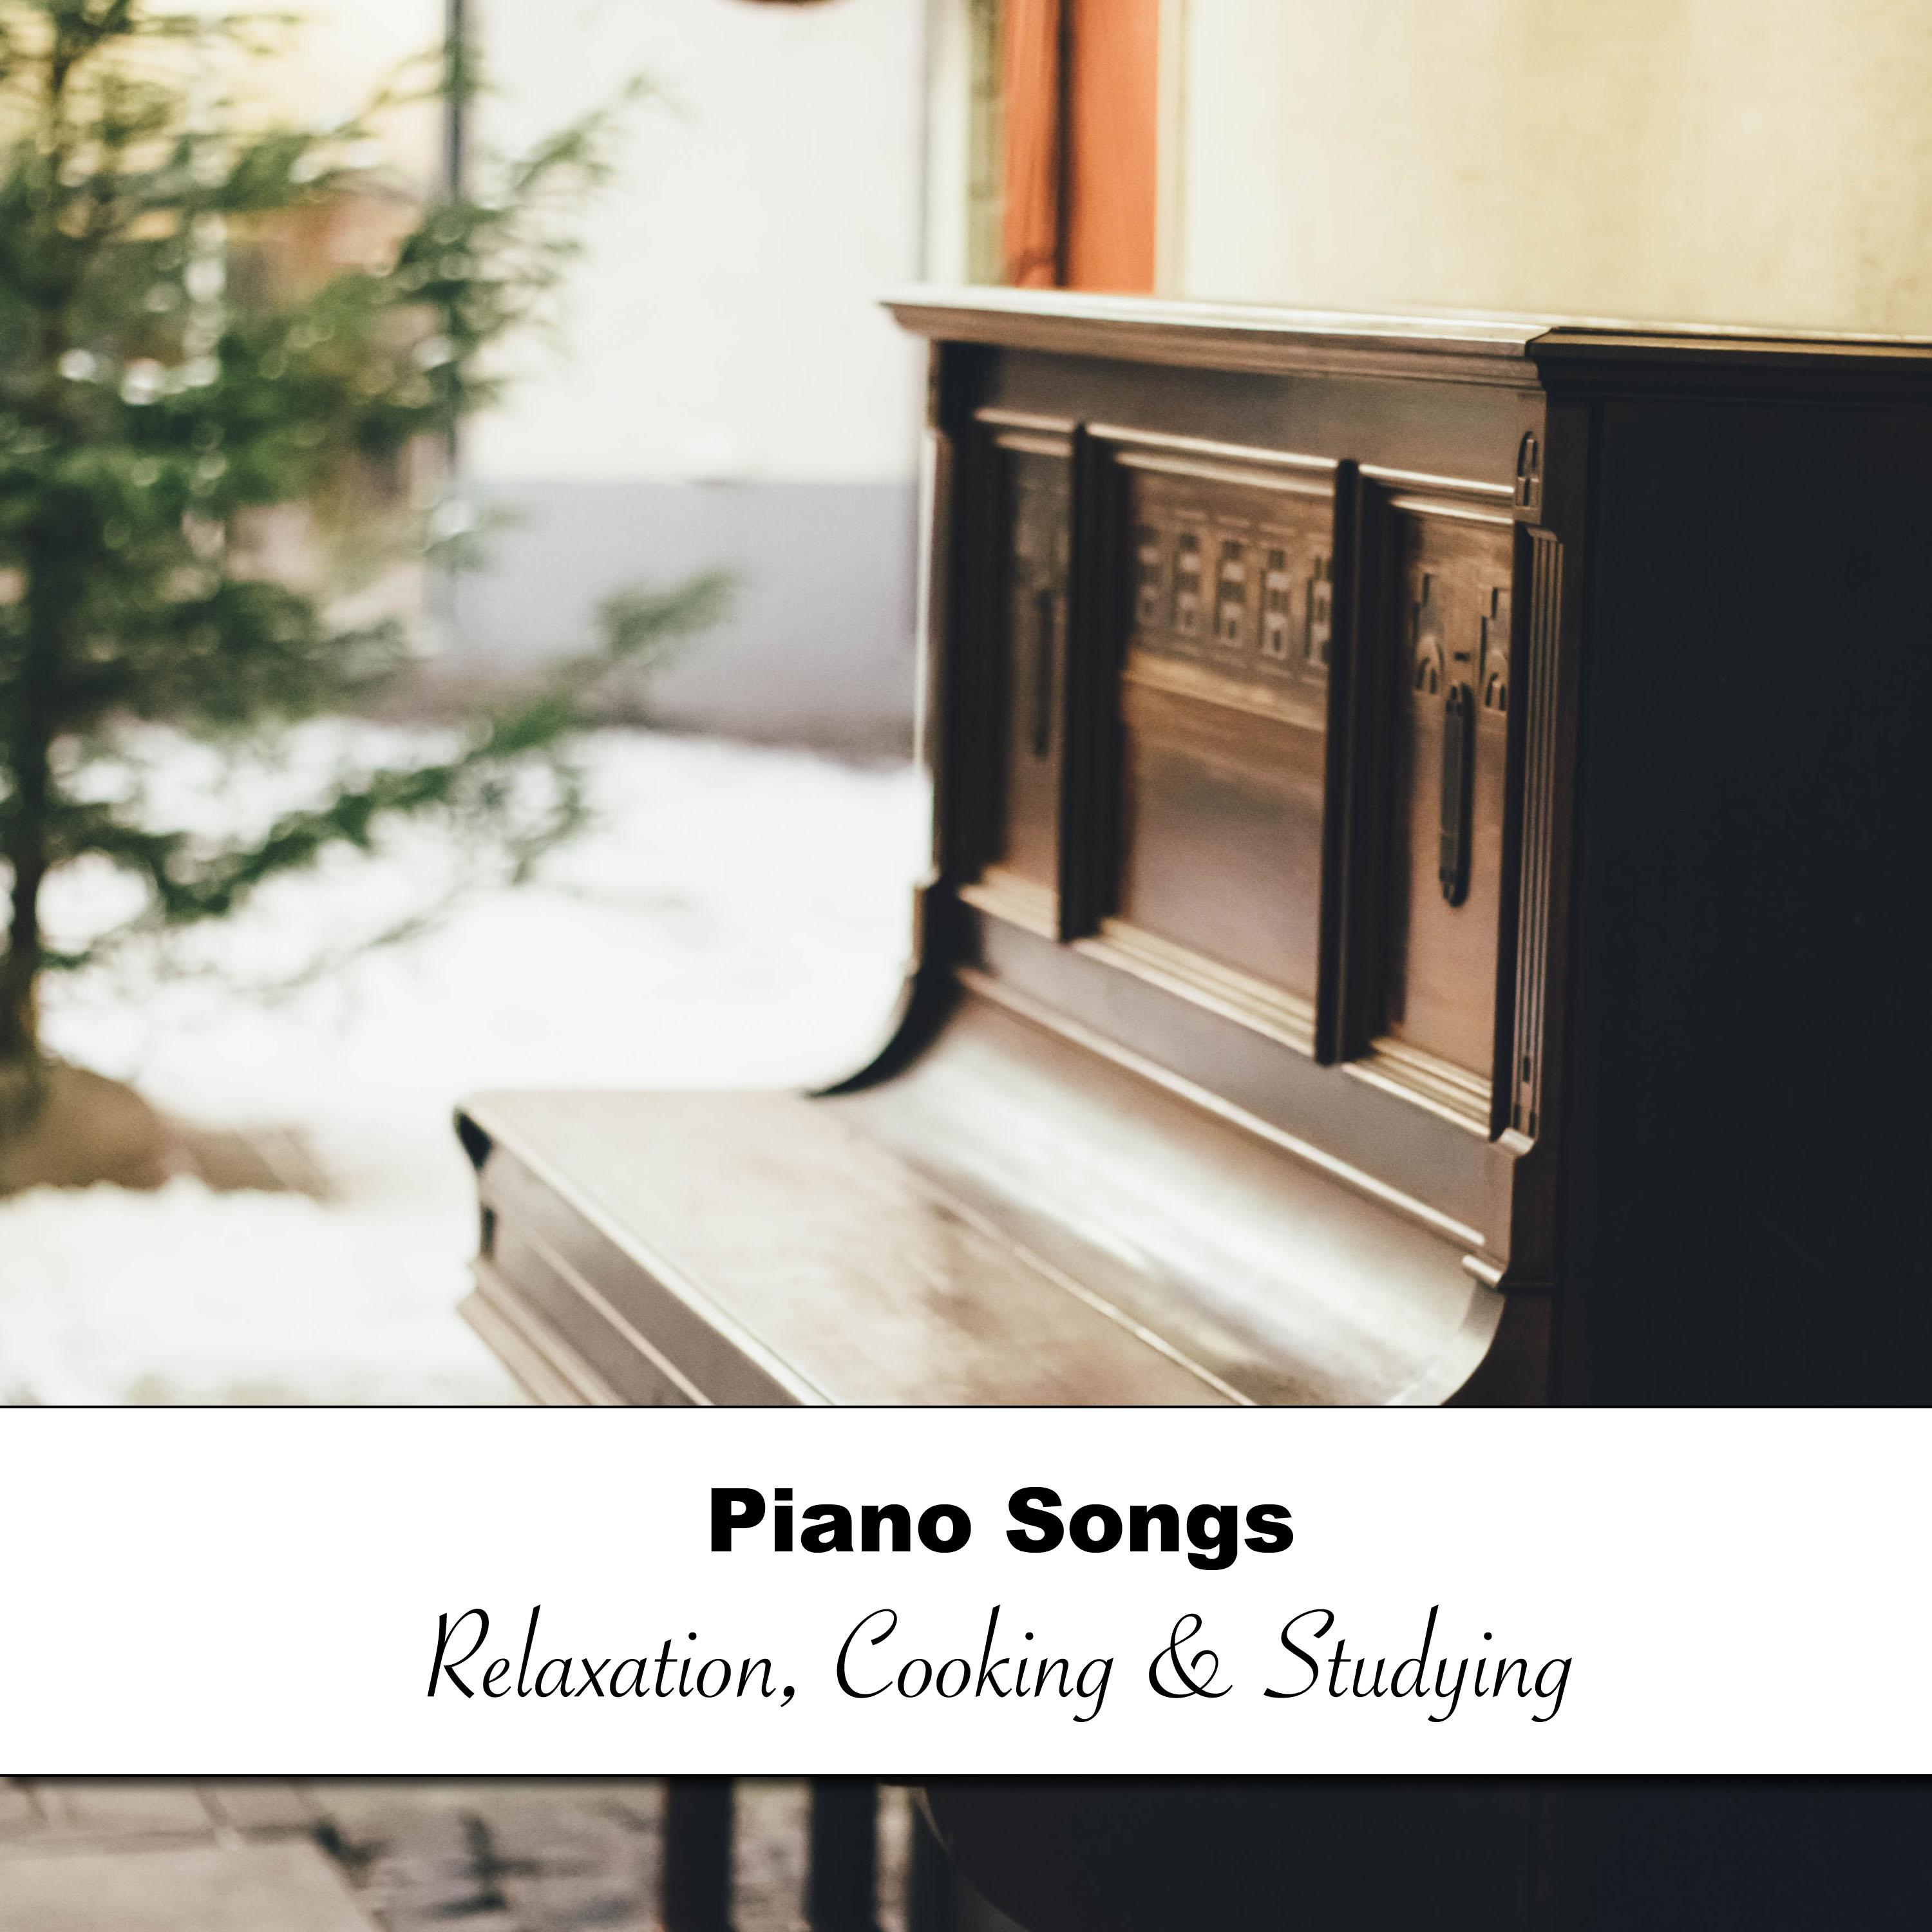 14 Piano Songs for Relaxation, Cooking and Studying